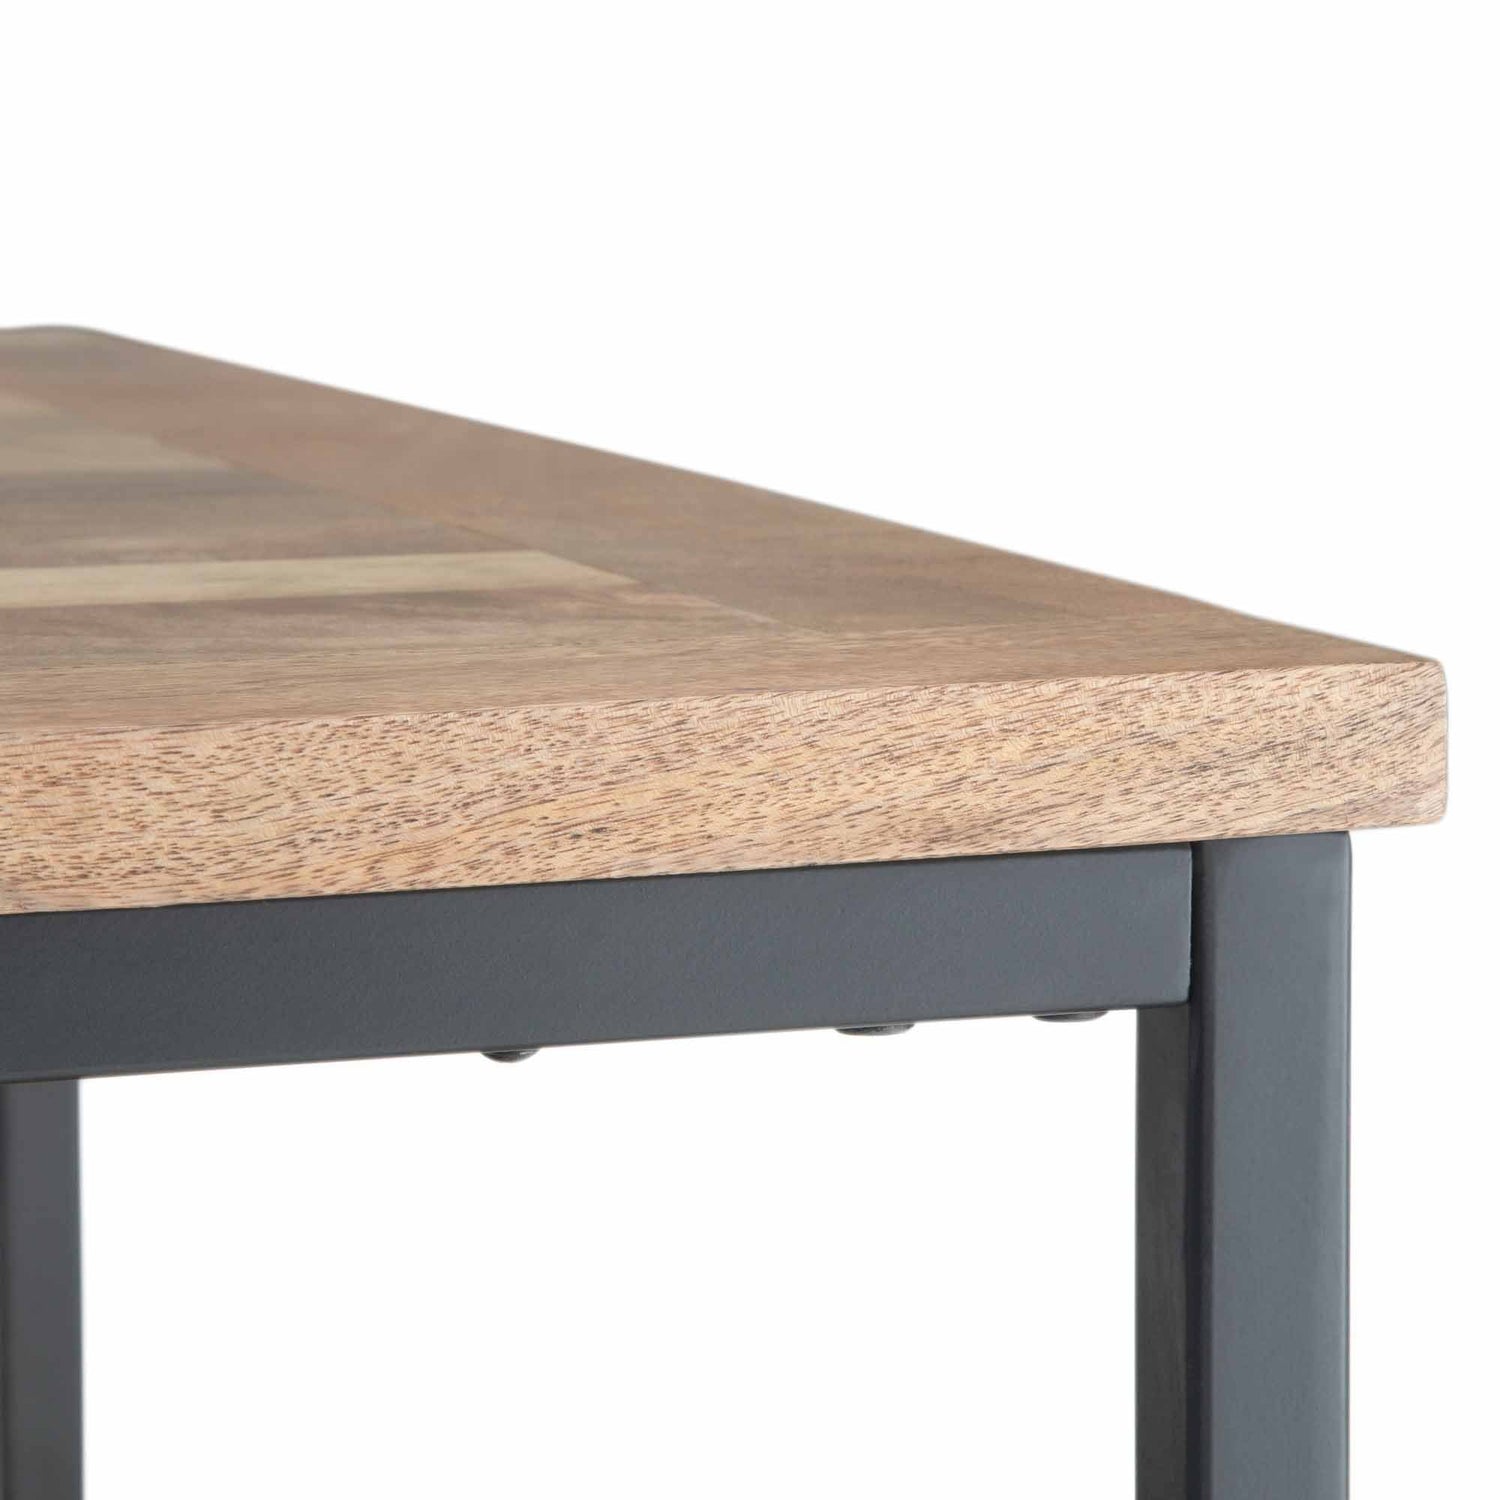 Natural | Skyler 34 inch Square Coffee Table